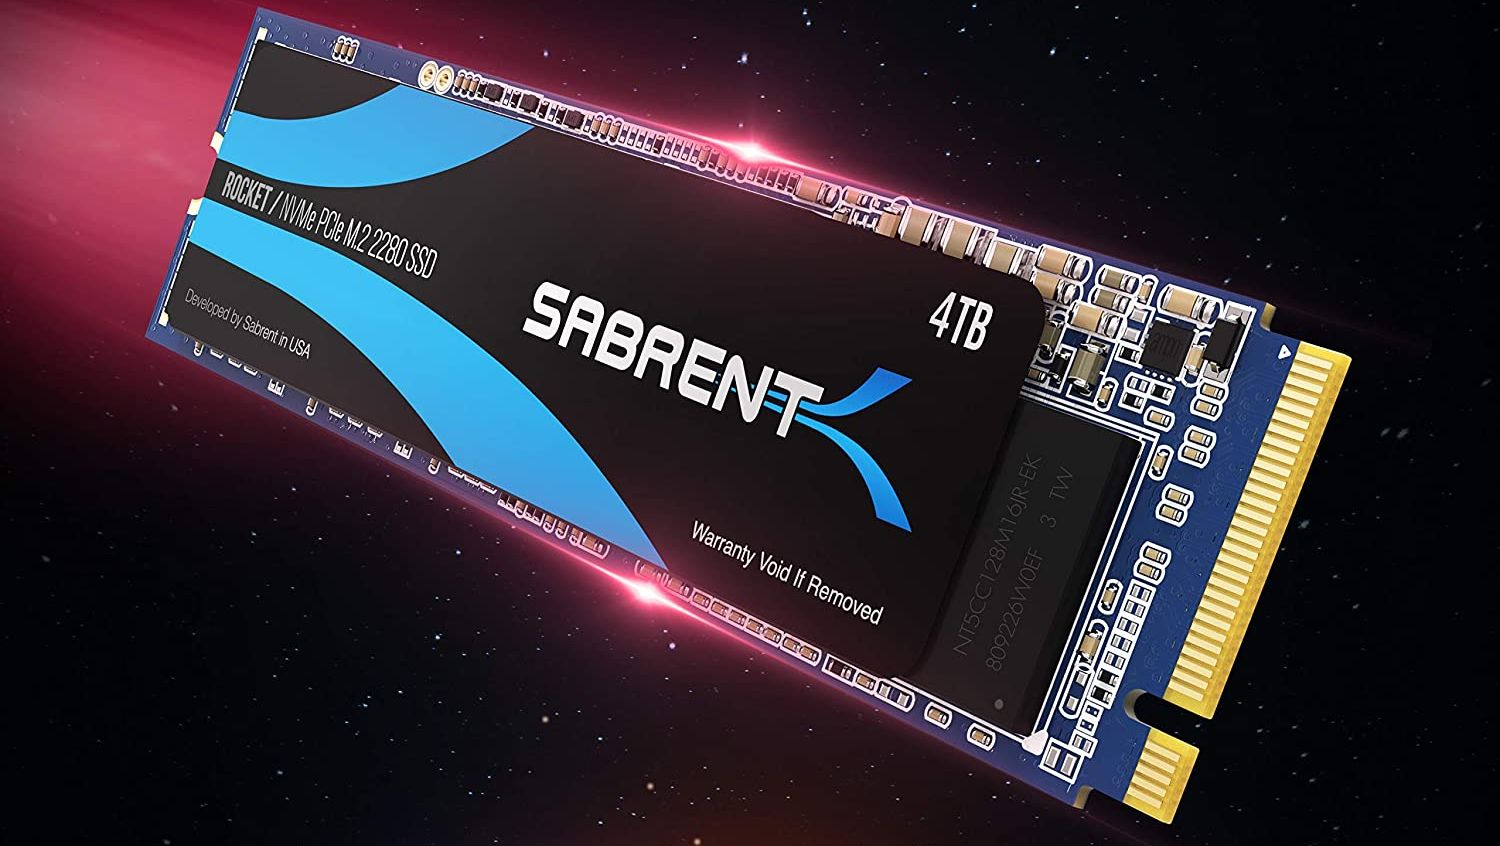 16tb M.2 Nvme Ssds Won’t Be Coming Any Time Soon Here’s Why